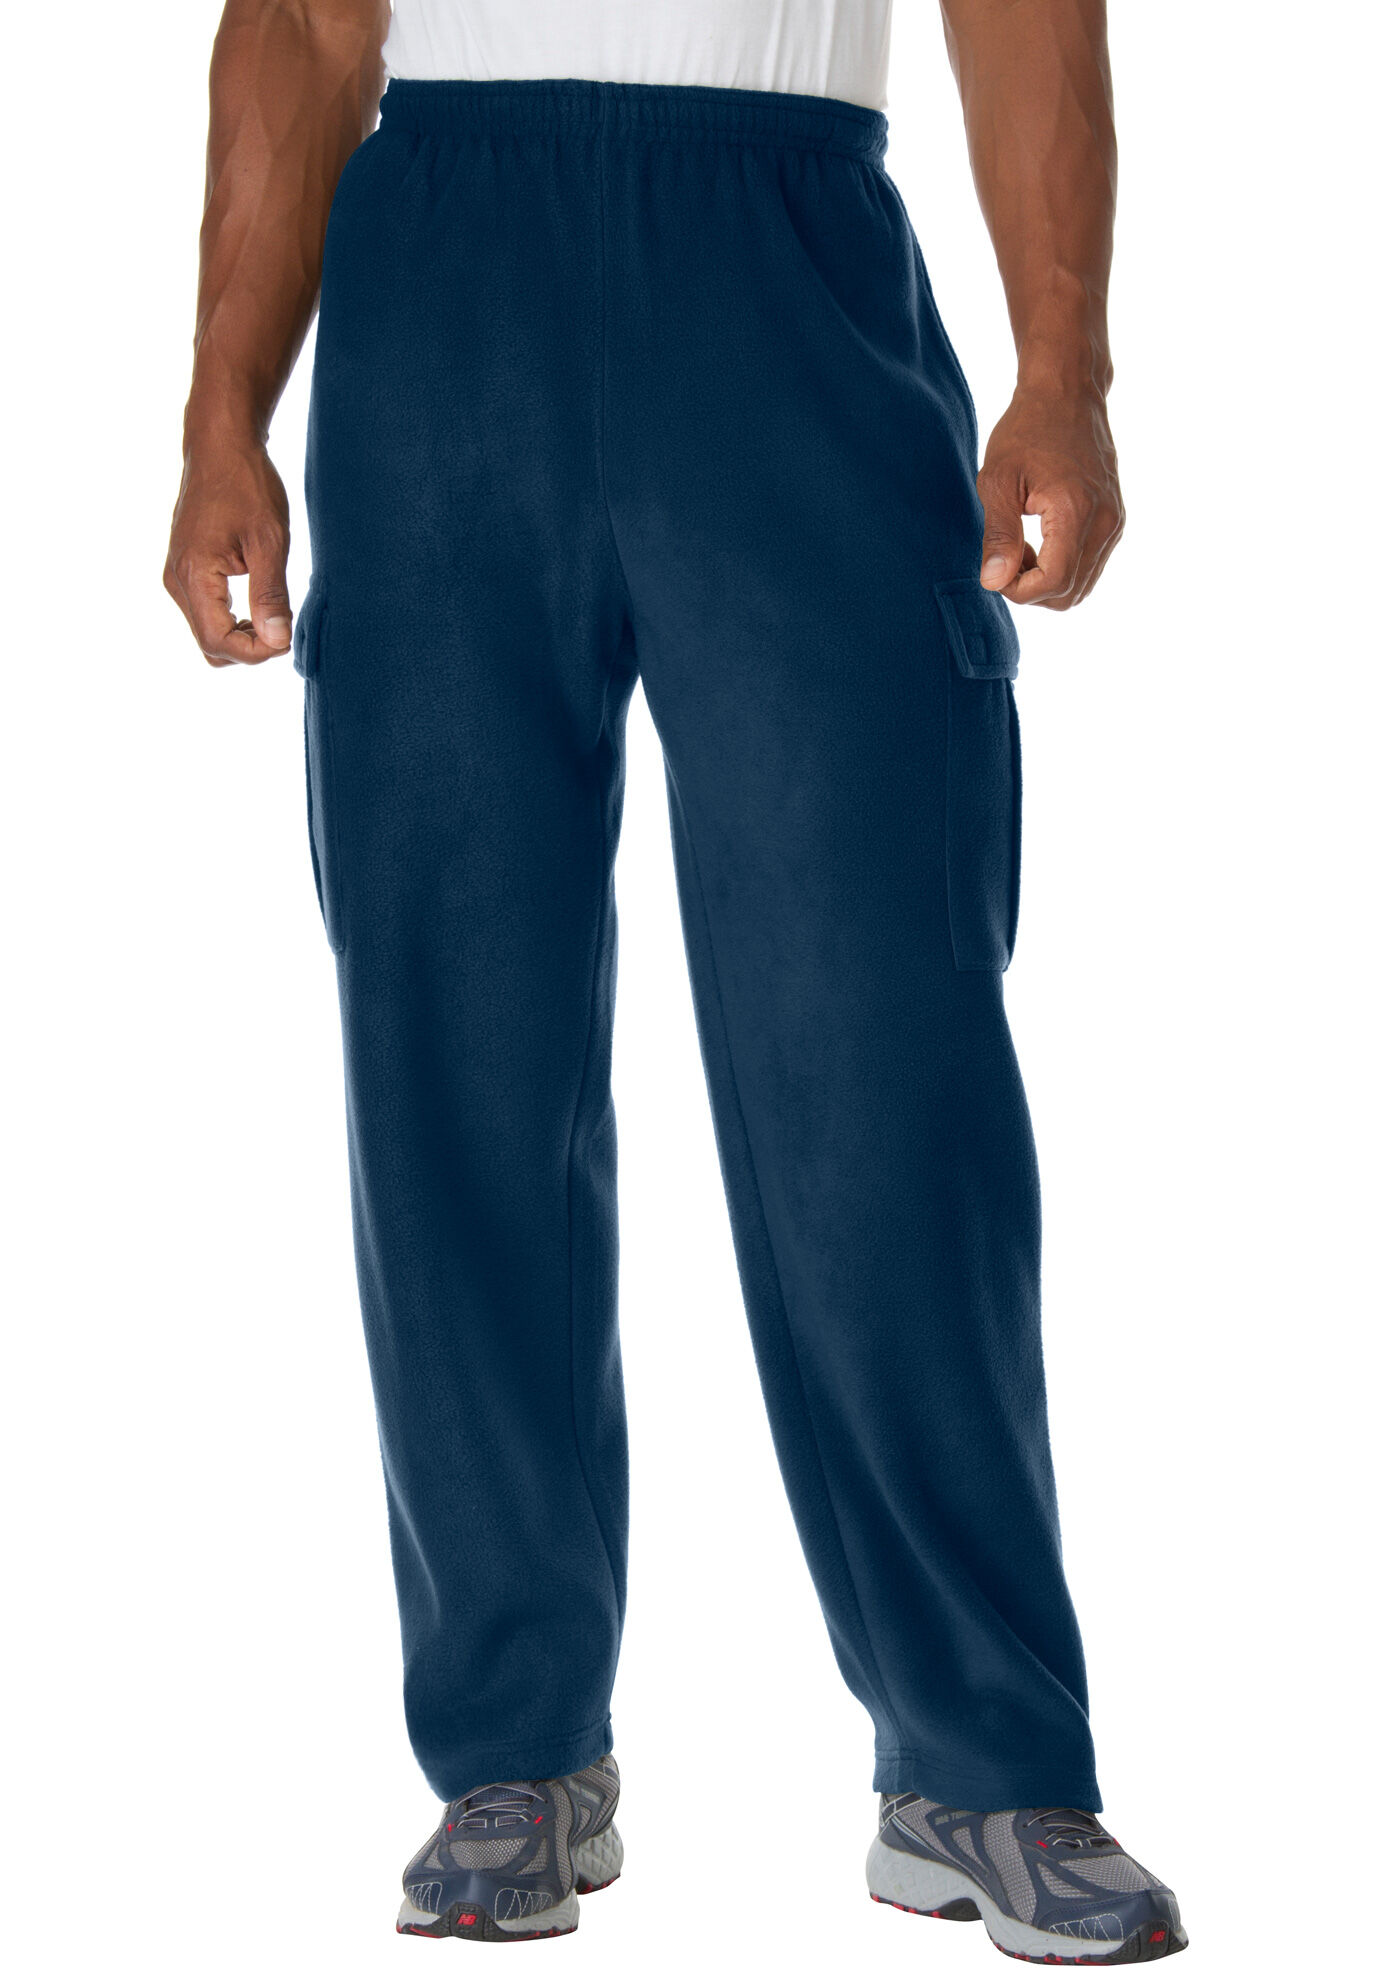 navy blue cargo pants big and tall